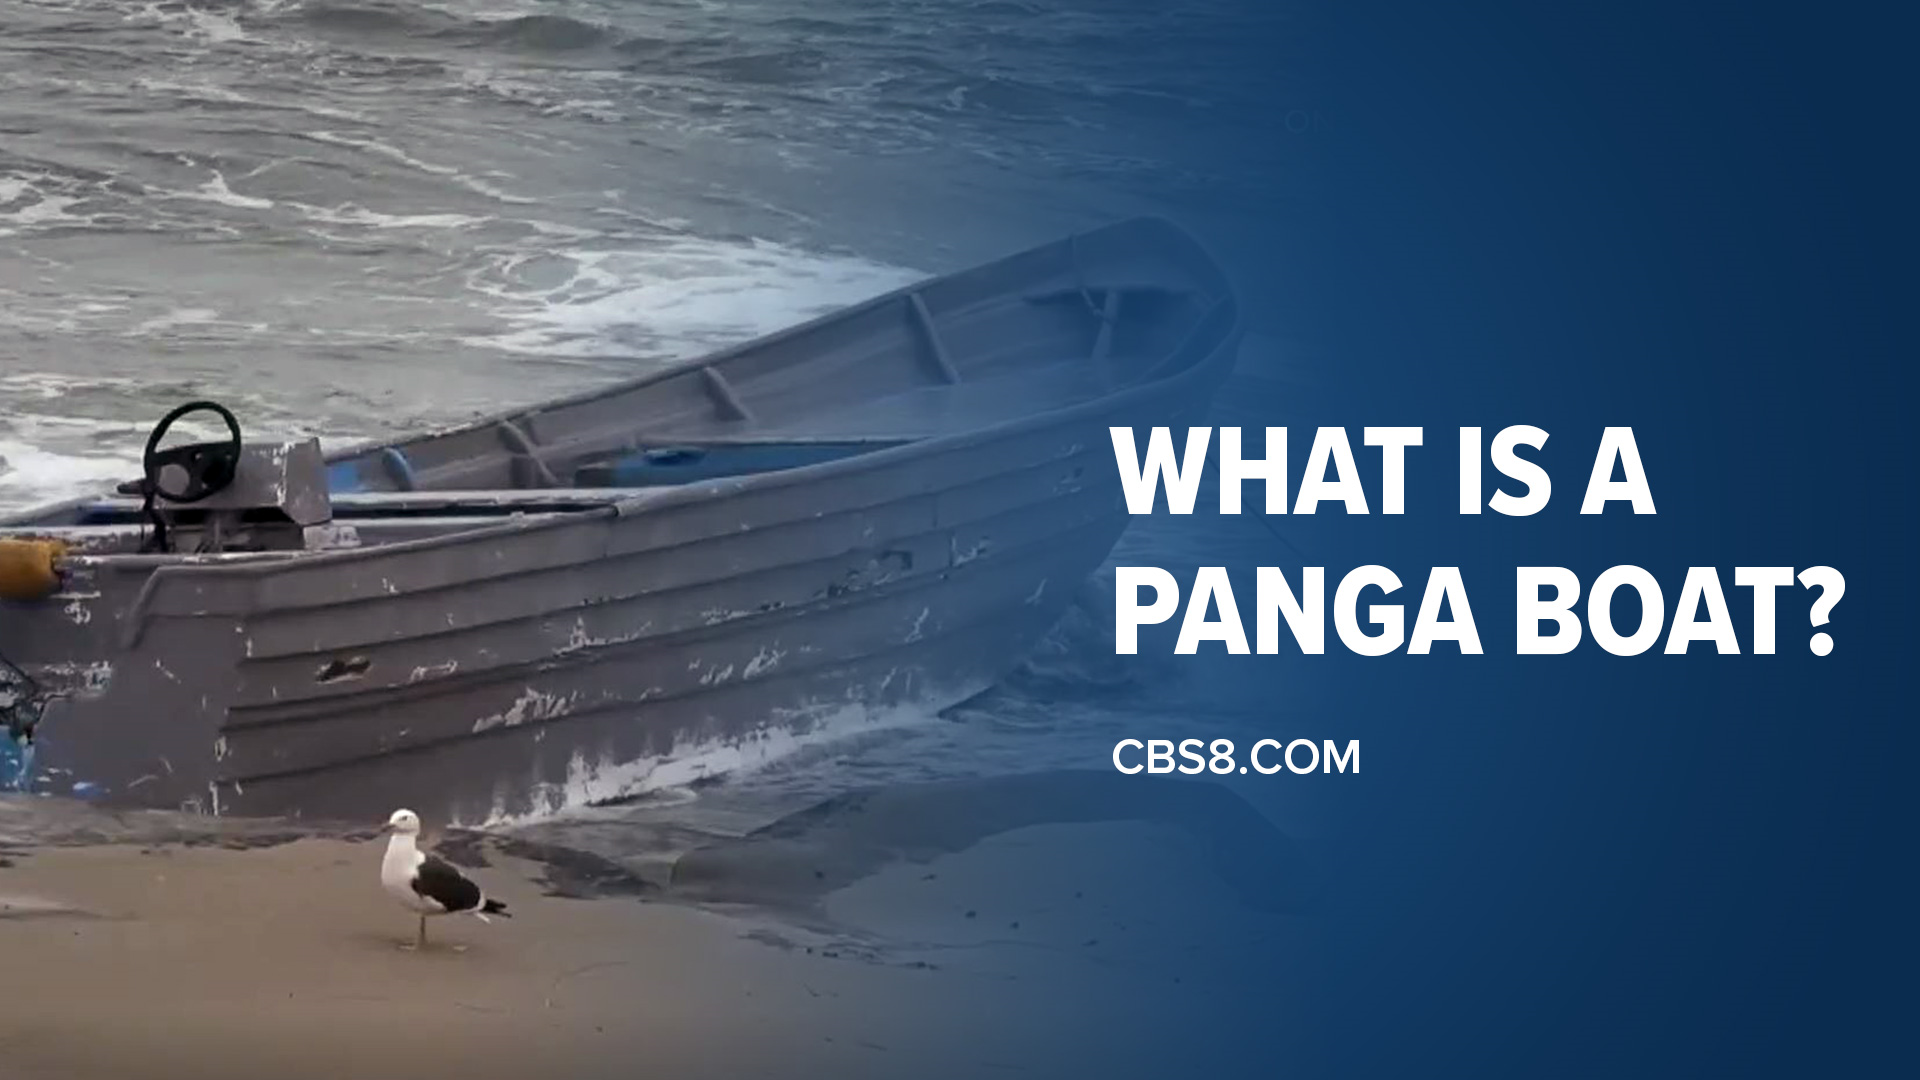 What is a panga boat? How do you spot one? How common are they? We answer your common questions.